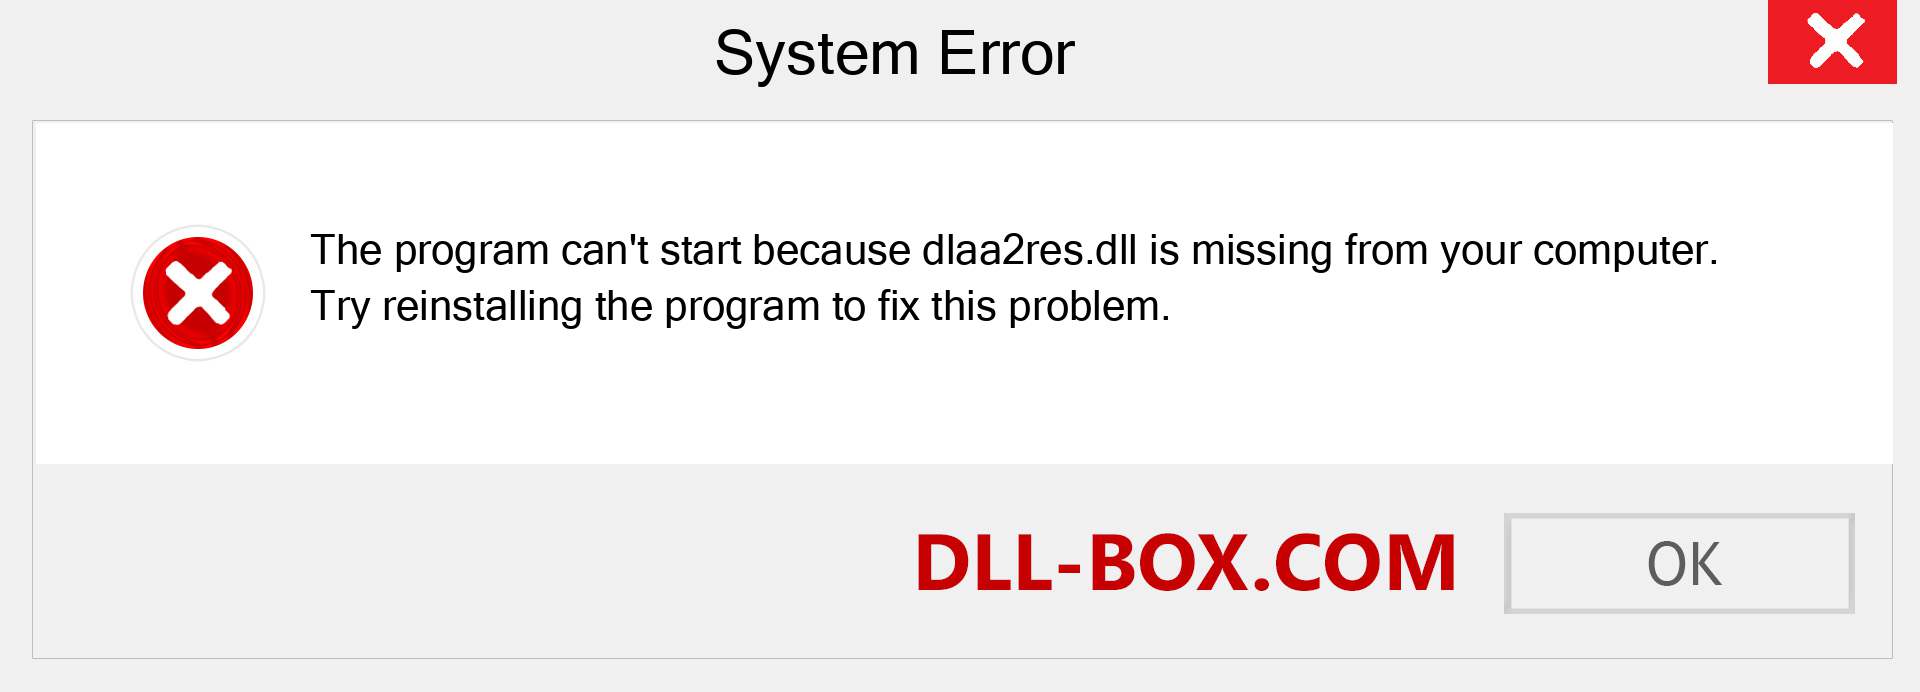  dlaa2res.dll file is missing?. Download for Windows 7, 8, 10 - Fix  dlaa2res dll Missing Error on Windows, photos, images